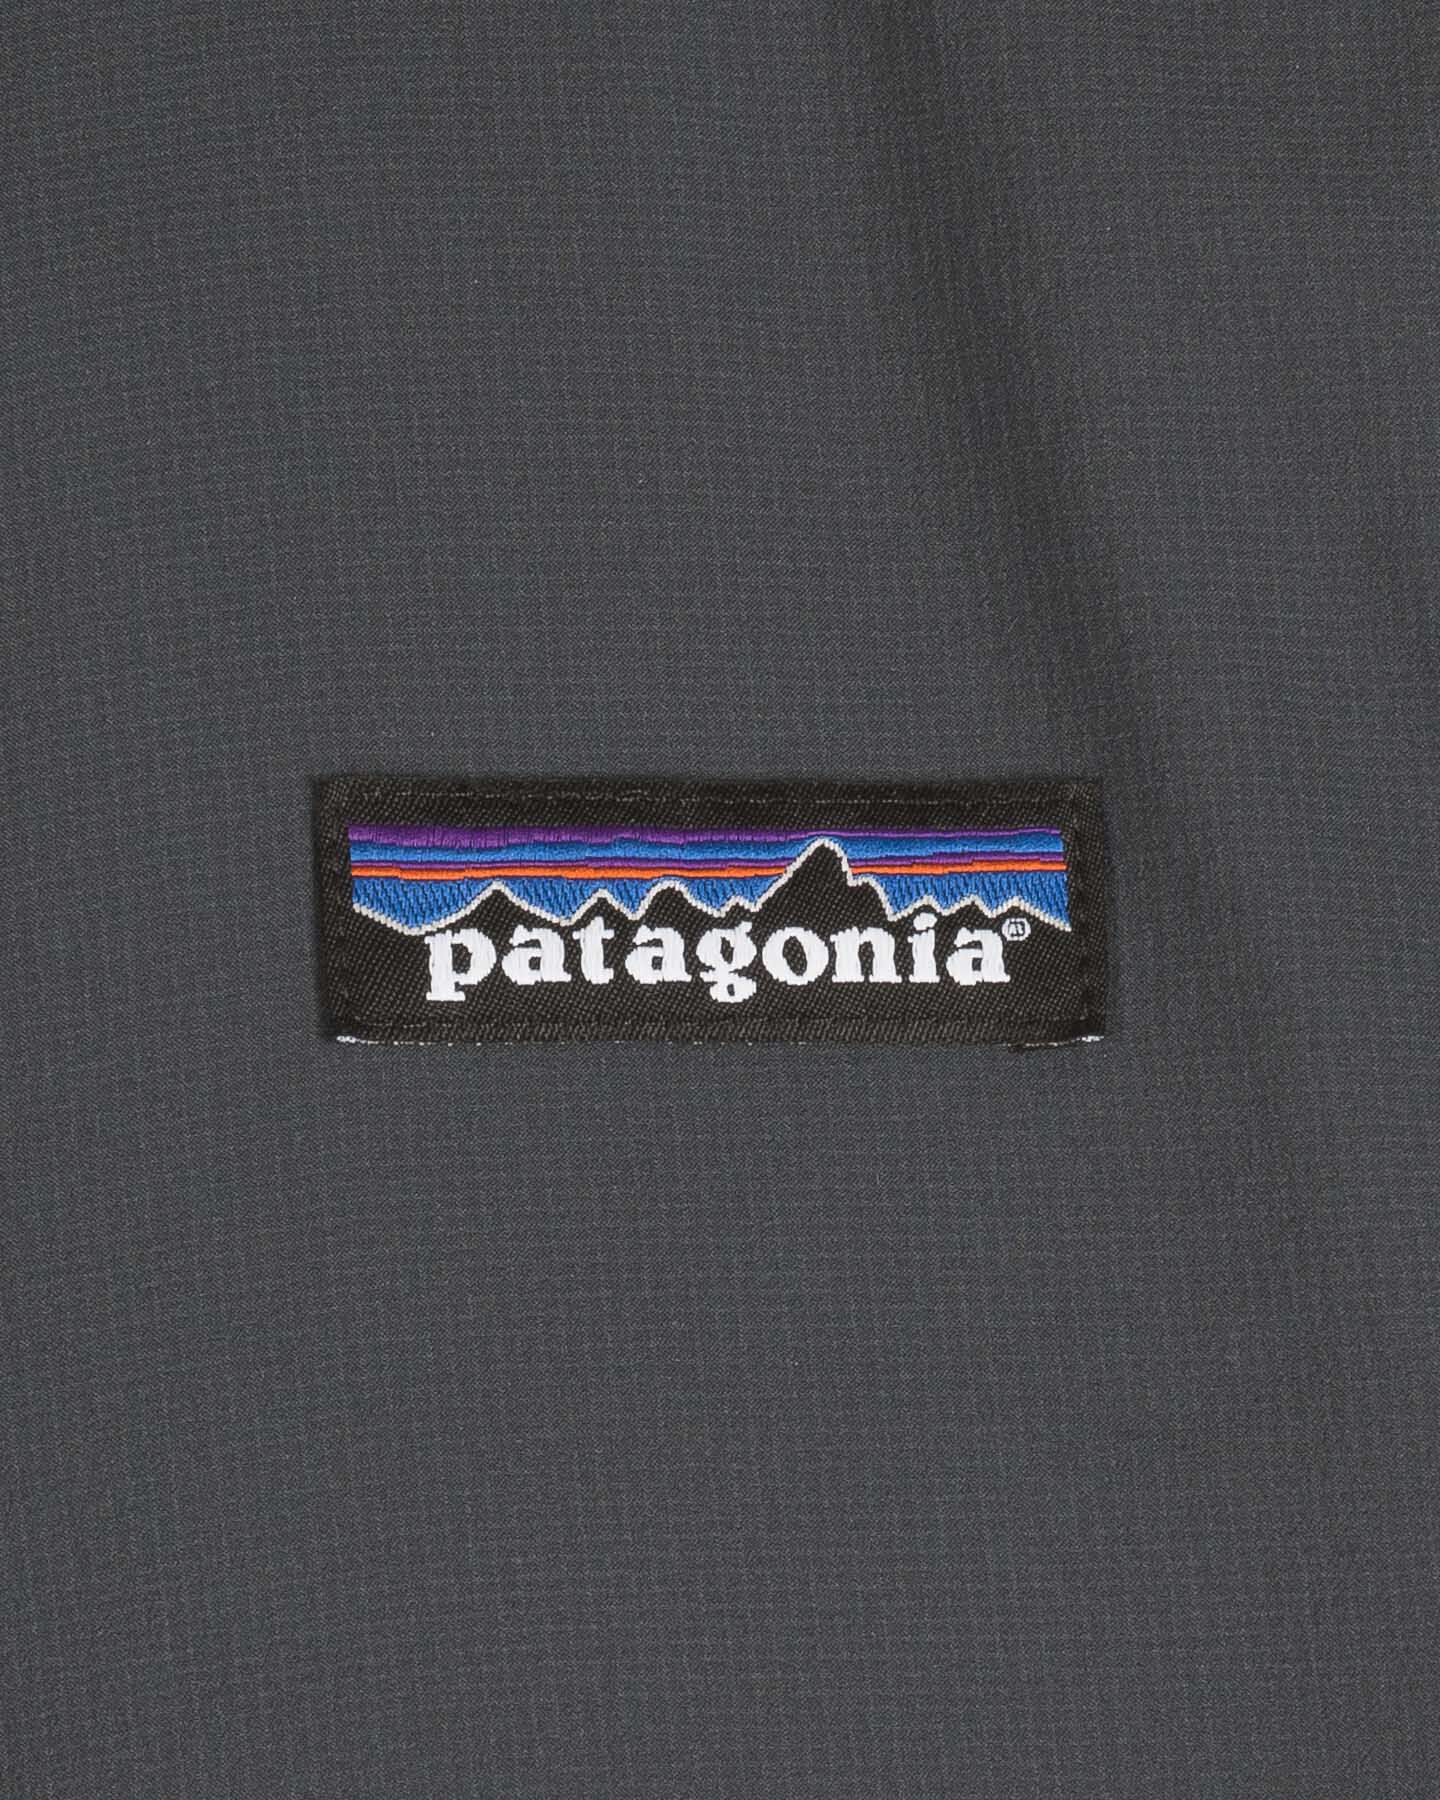  Giacca outdoor PATAGONIA THERMAL AIRSHED M S4103399|SMDB|M scatto 2